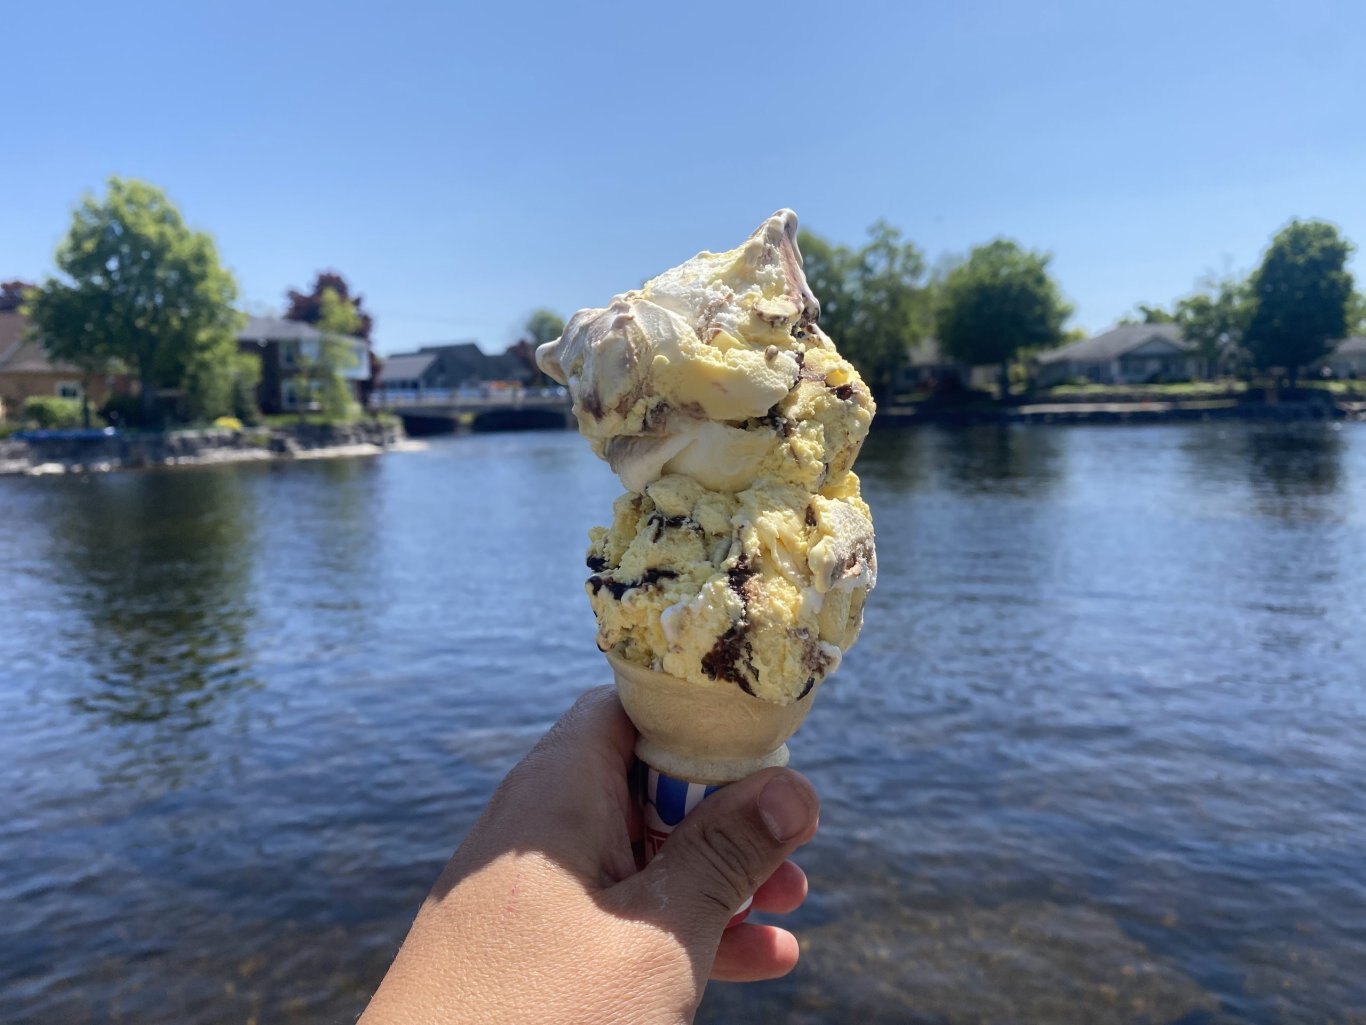 CITY COUNTRYSIDE AND ICE CREAM